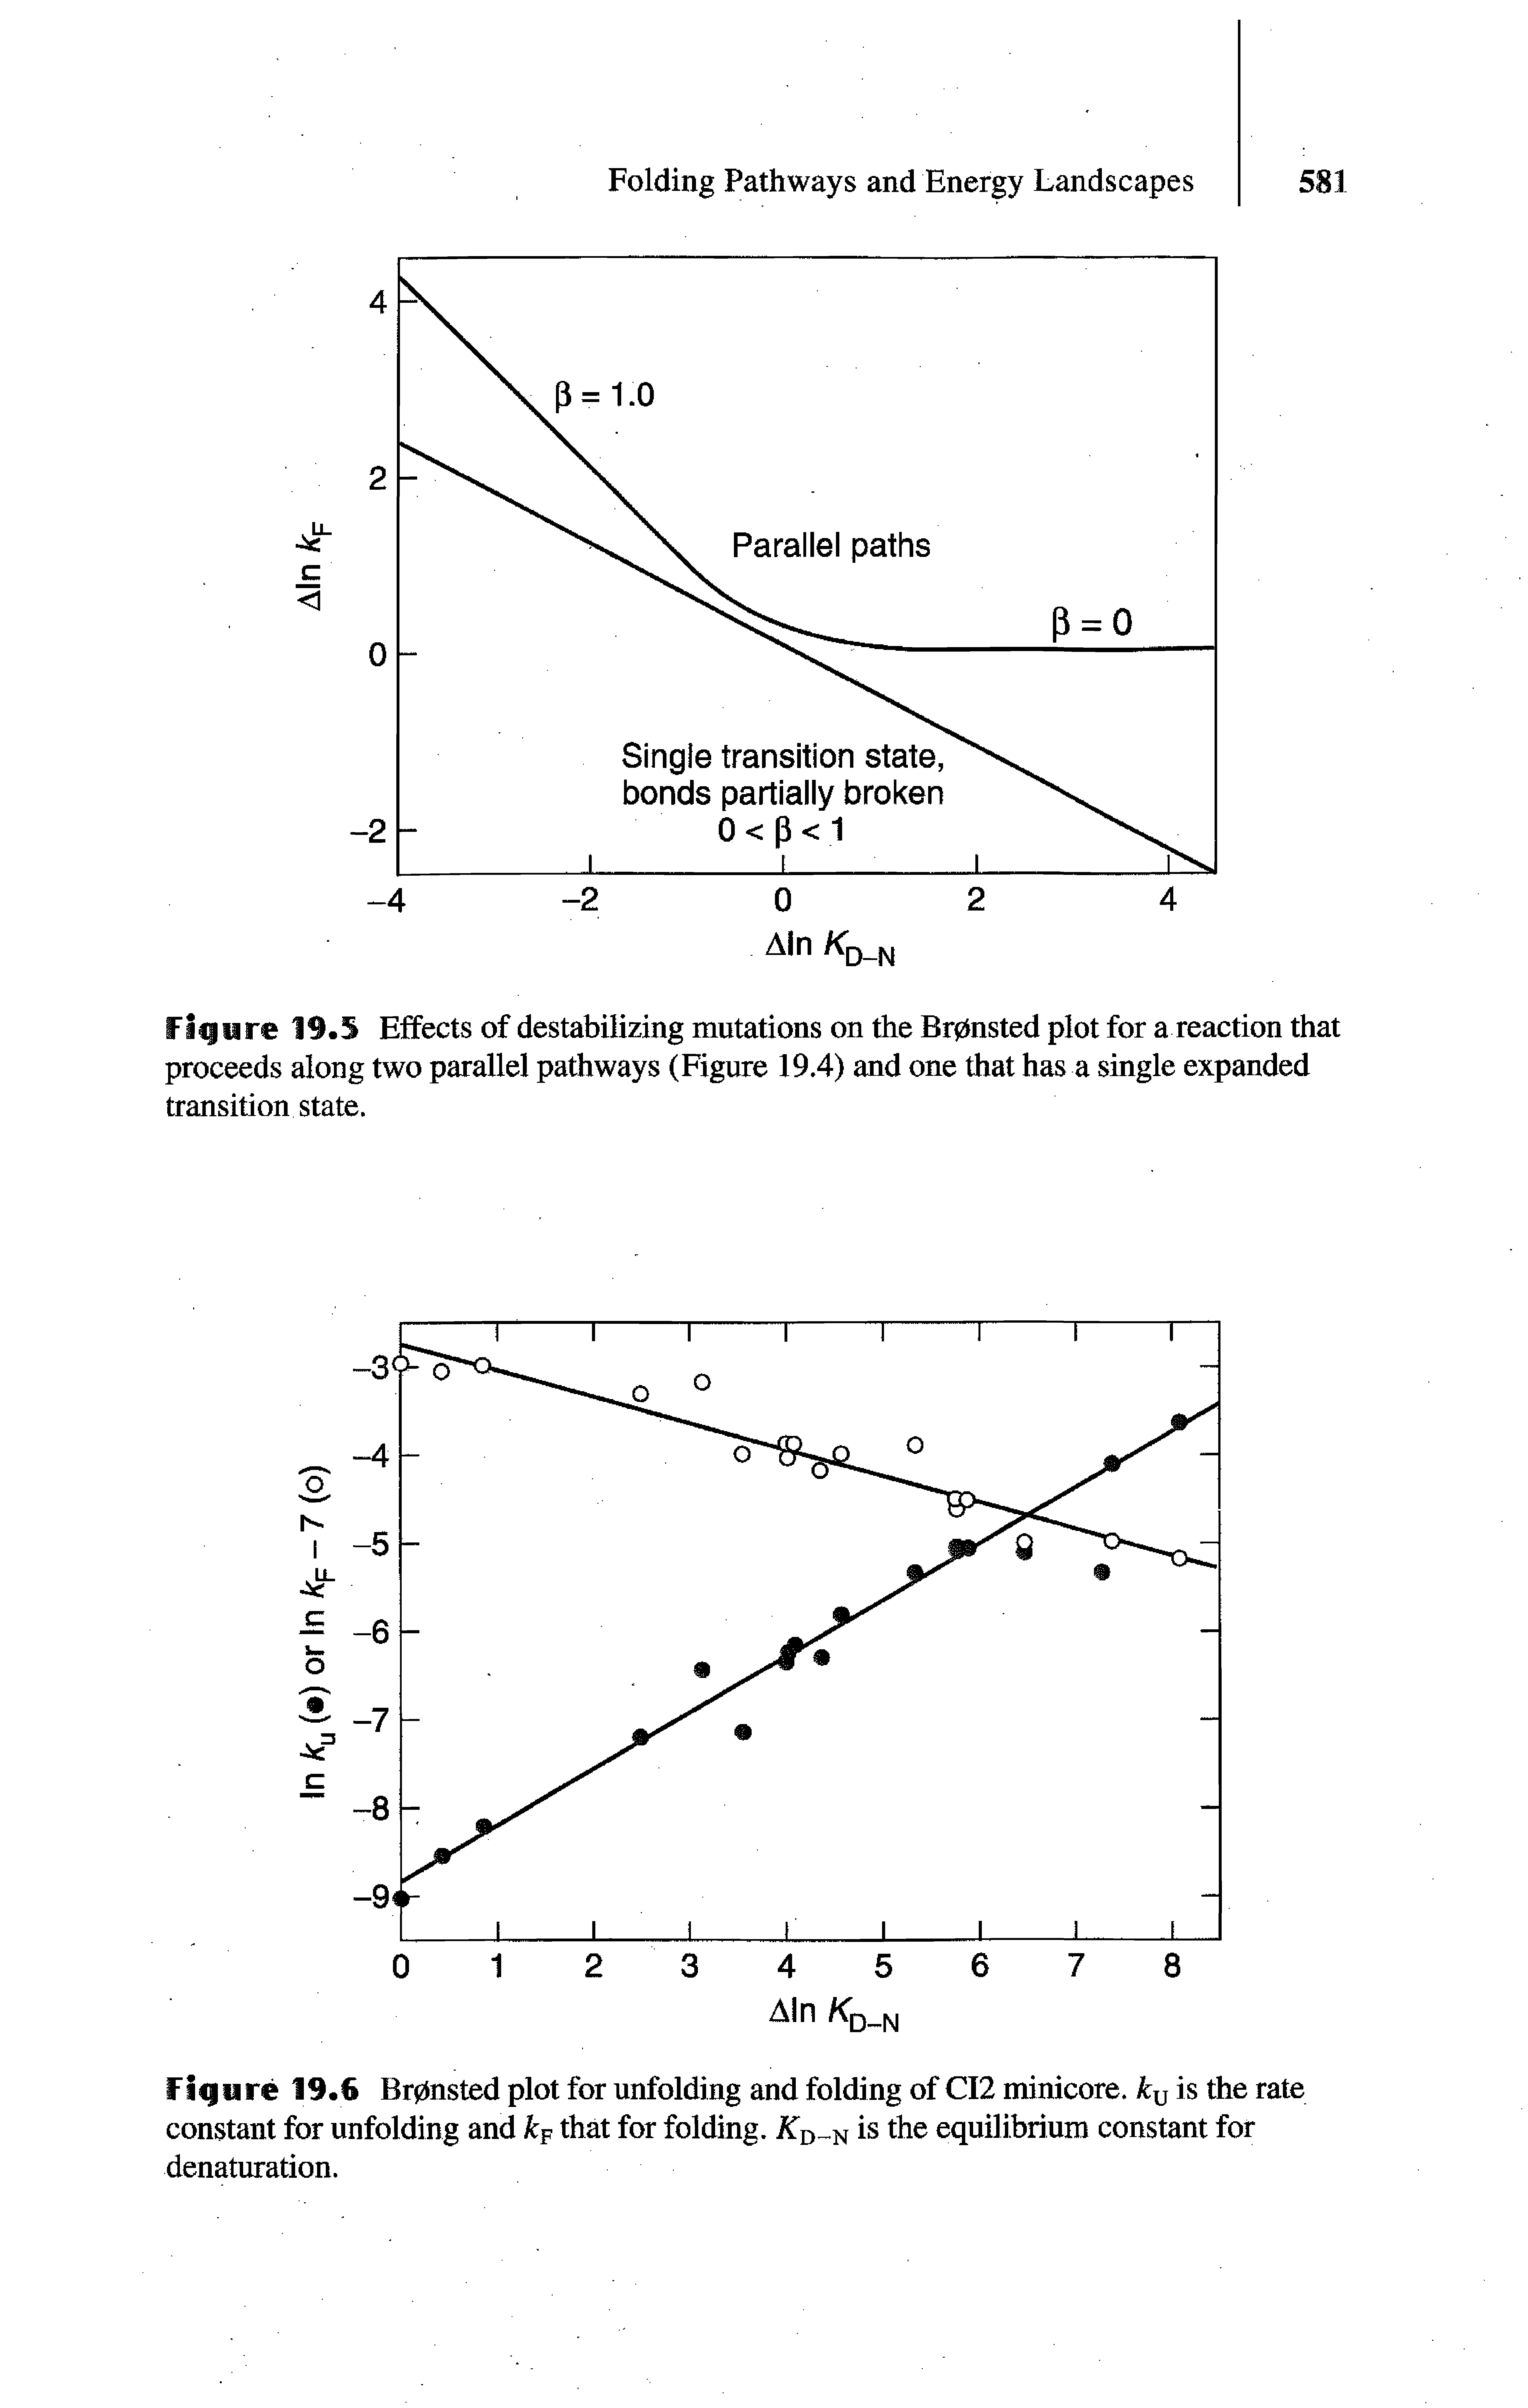 Figure 19.5 Effects of destabilizing mutations on the Brpnsted plot for a reaction that proceeds along two parallel pathways (Figure 19.4) and one that has a single expanded transition state.